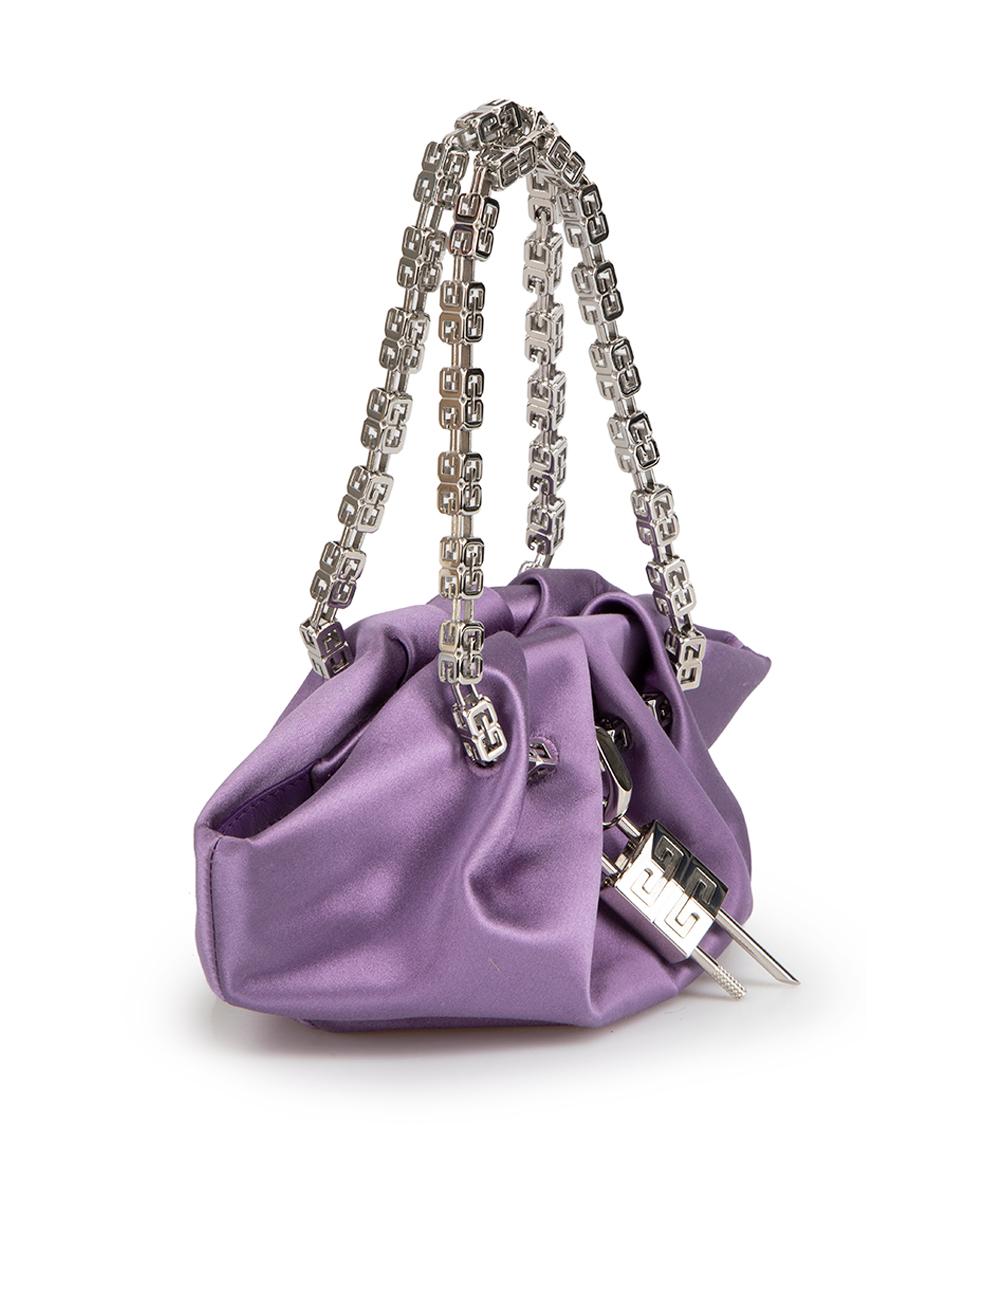 CONDITION is Very good. Minimal wear is evident. Minimal scuffing along top outer corners to this used Givenchy designer resale item. This item comes with original dust bag.



Details


Lilac

Satin

Mini bag

2x Silver GG metal chain top